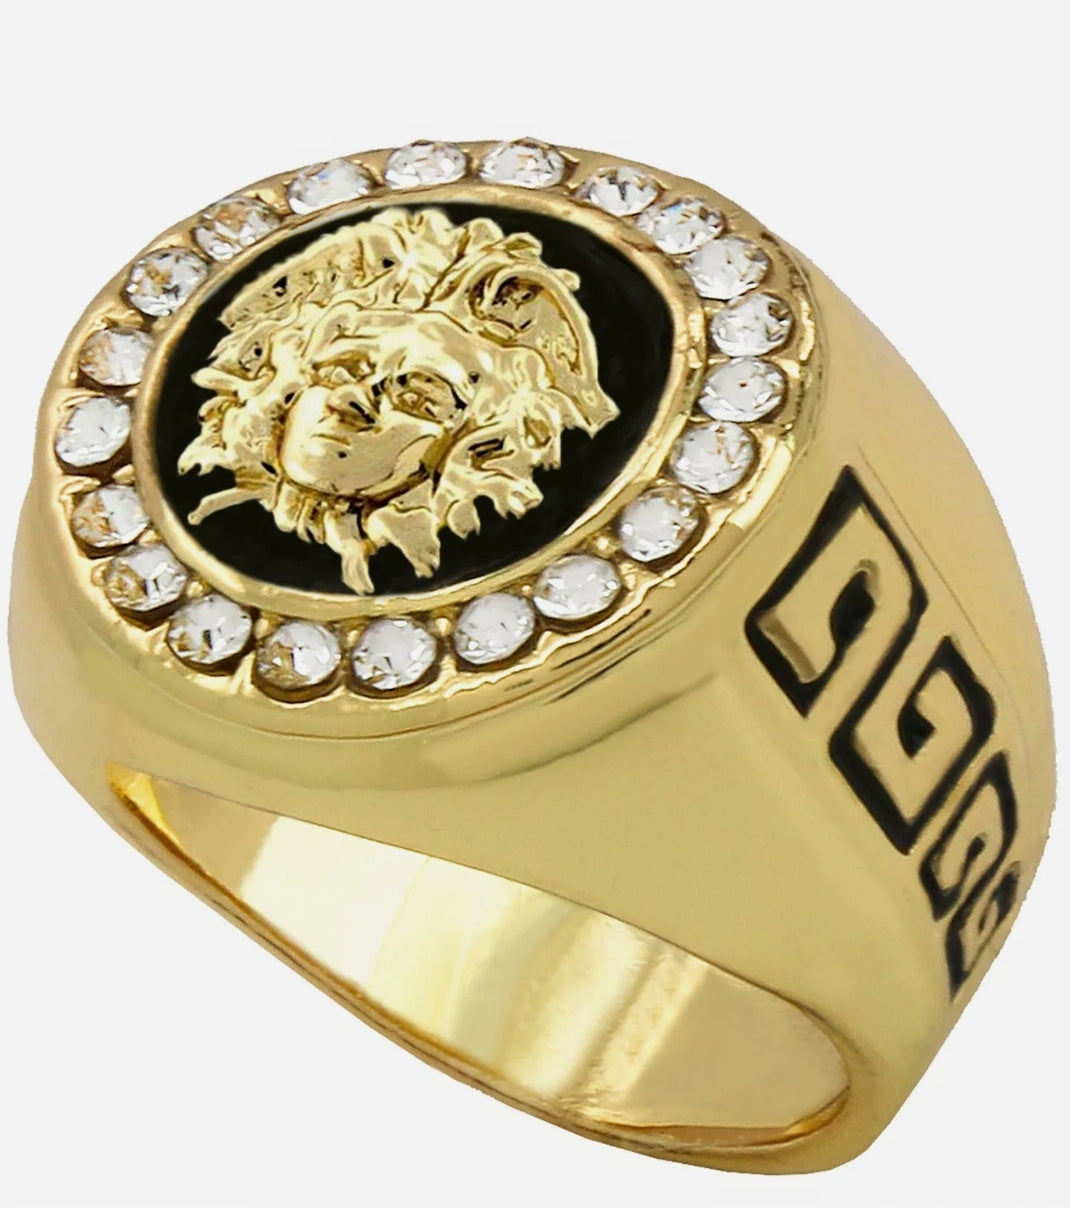 Versace Gold-Tone And Enamel Signet Ring | Signet ring men, Rings for men,  Signet ring